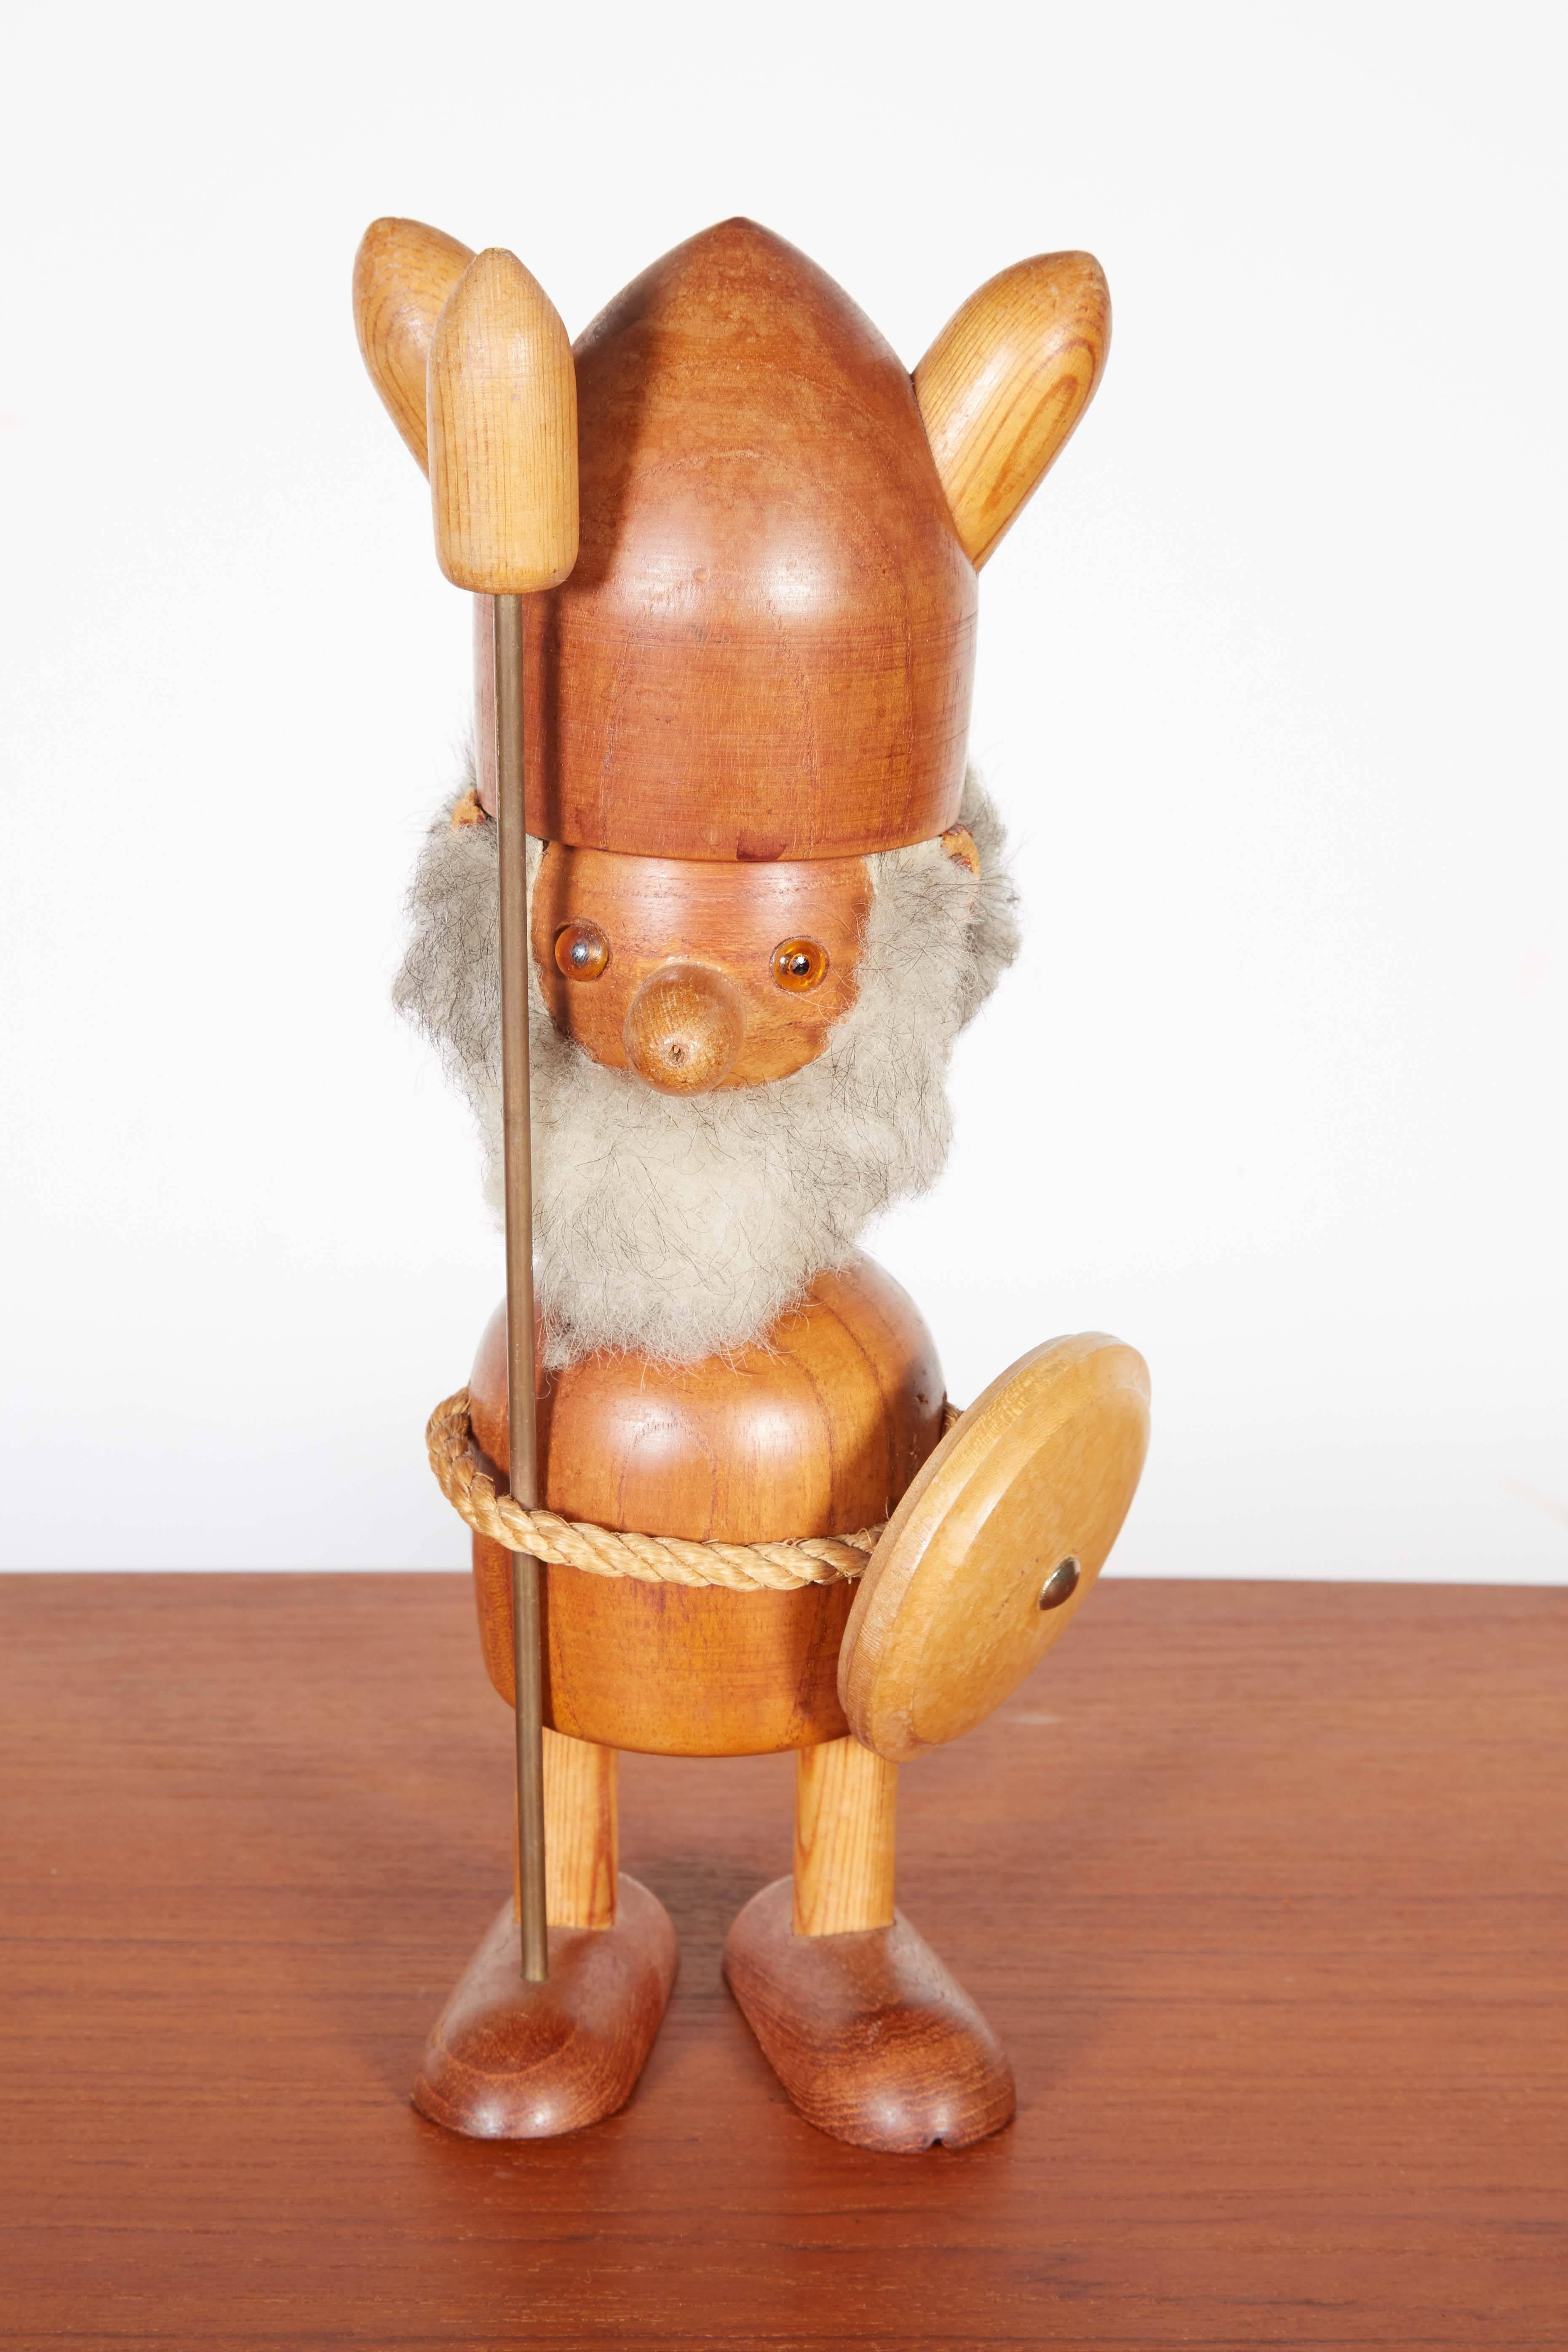 Vintage 1950s Large Wooden Teak Viking by Hans Bolling

This Danish Teak Viking is in excellent condition except for a small amount of wear on the leather ears. Very rare in this size. Ready for pick up, or Shipping anywhere in the world.